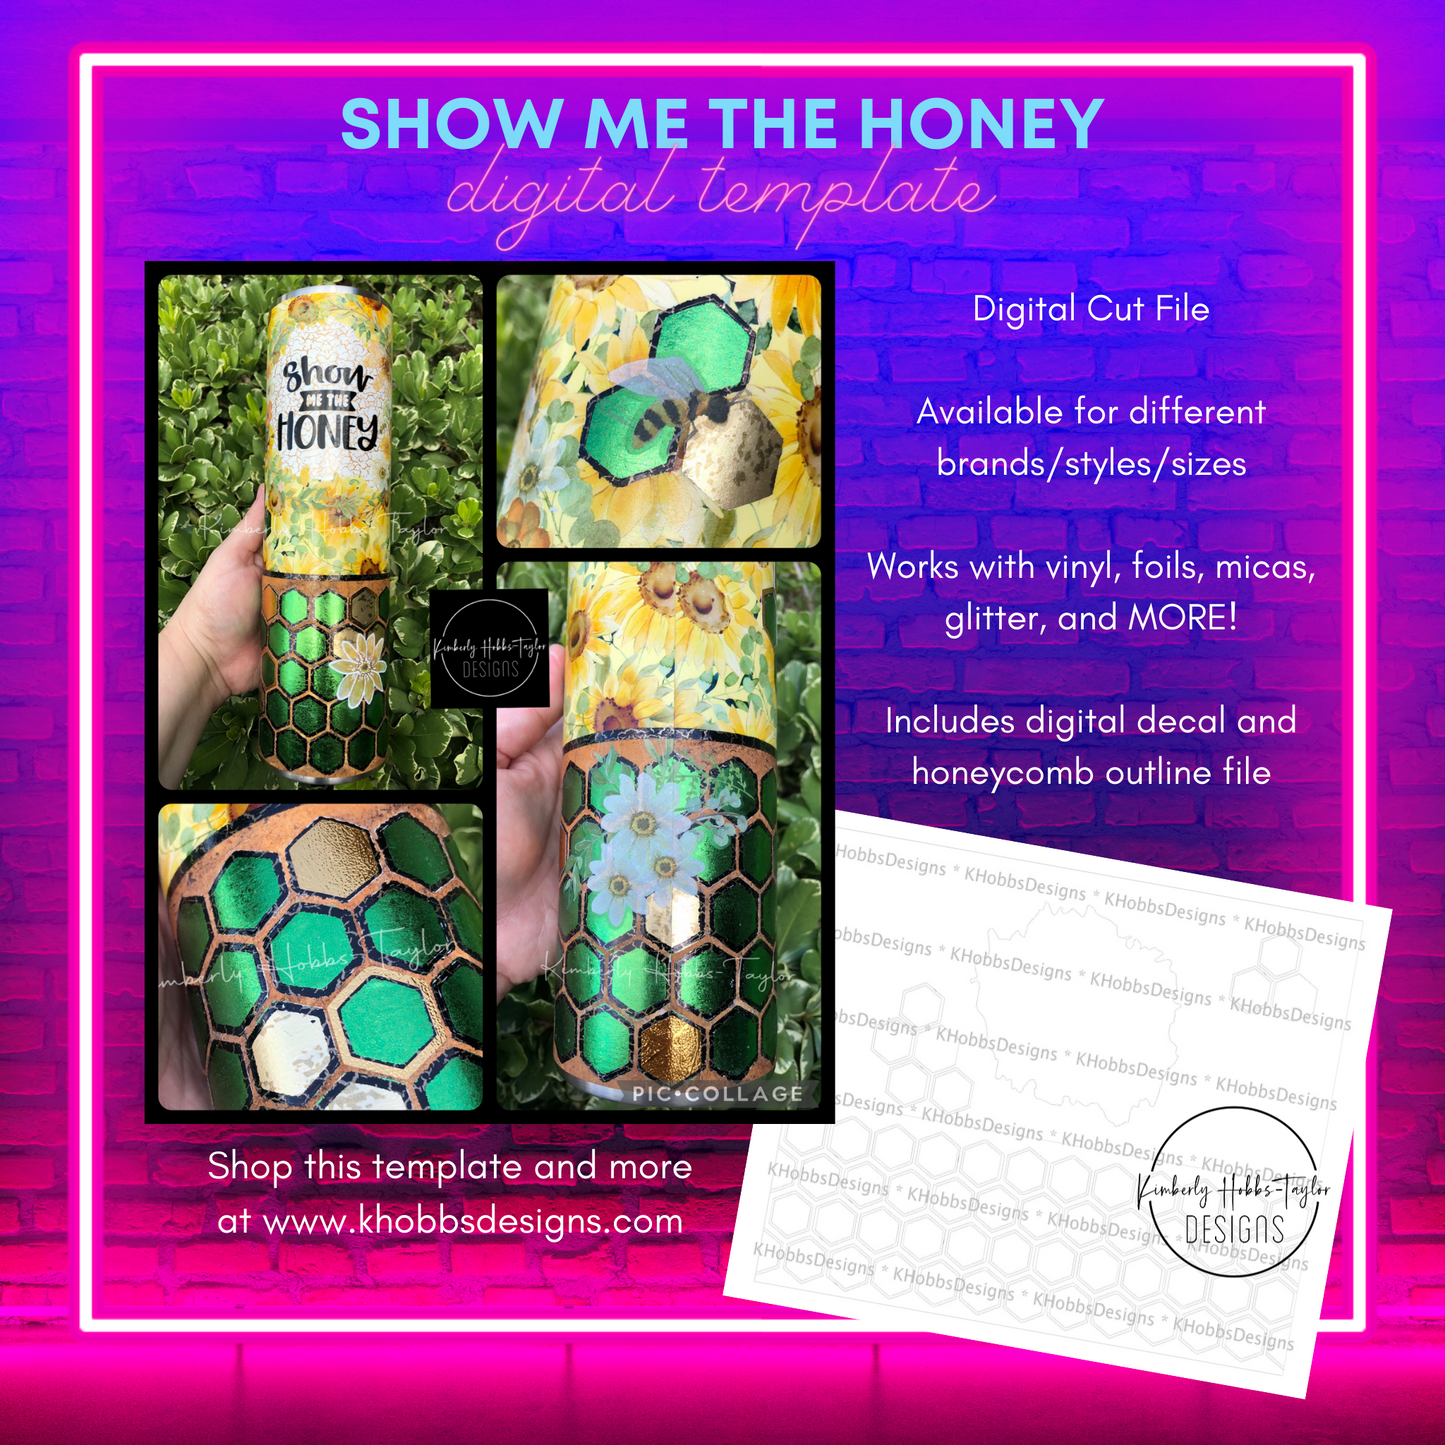 Show Me The Honey Template for HOGG 20 Classic Skinny Straight - Digital Cut File Only